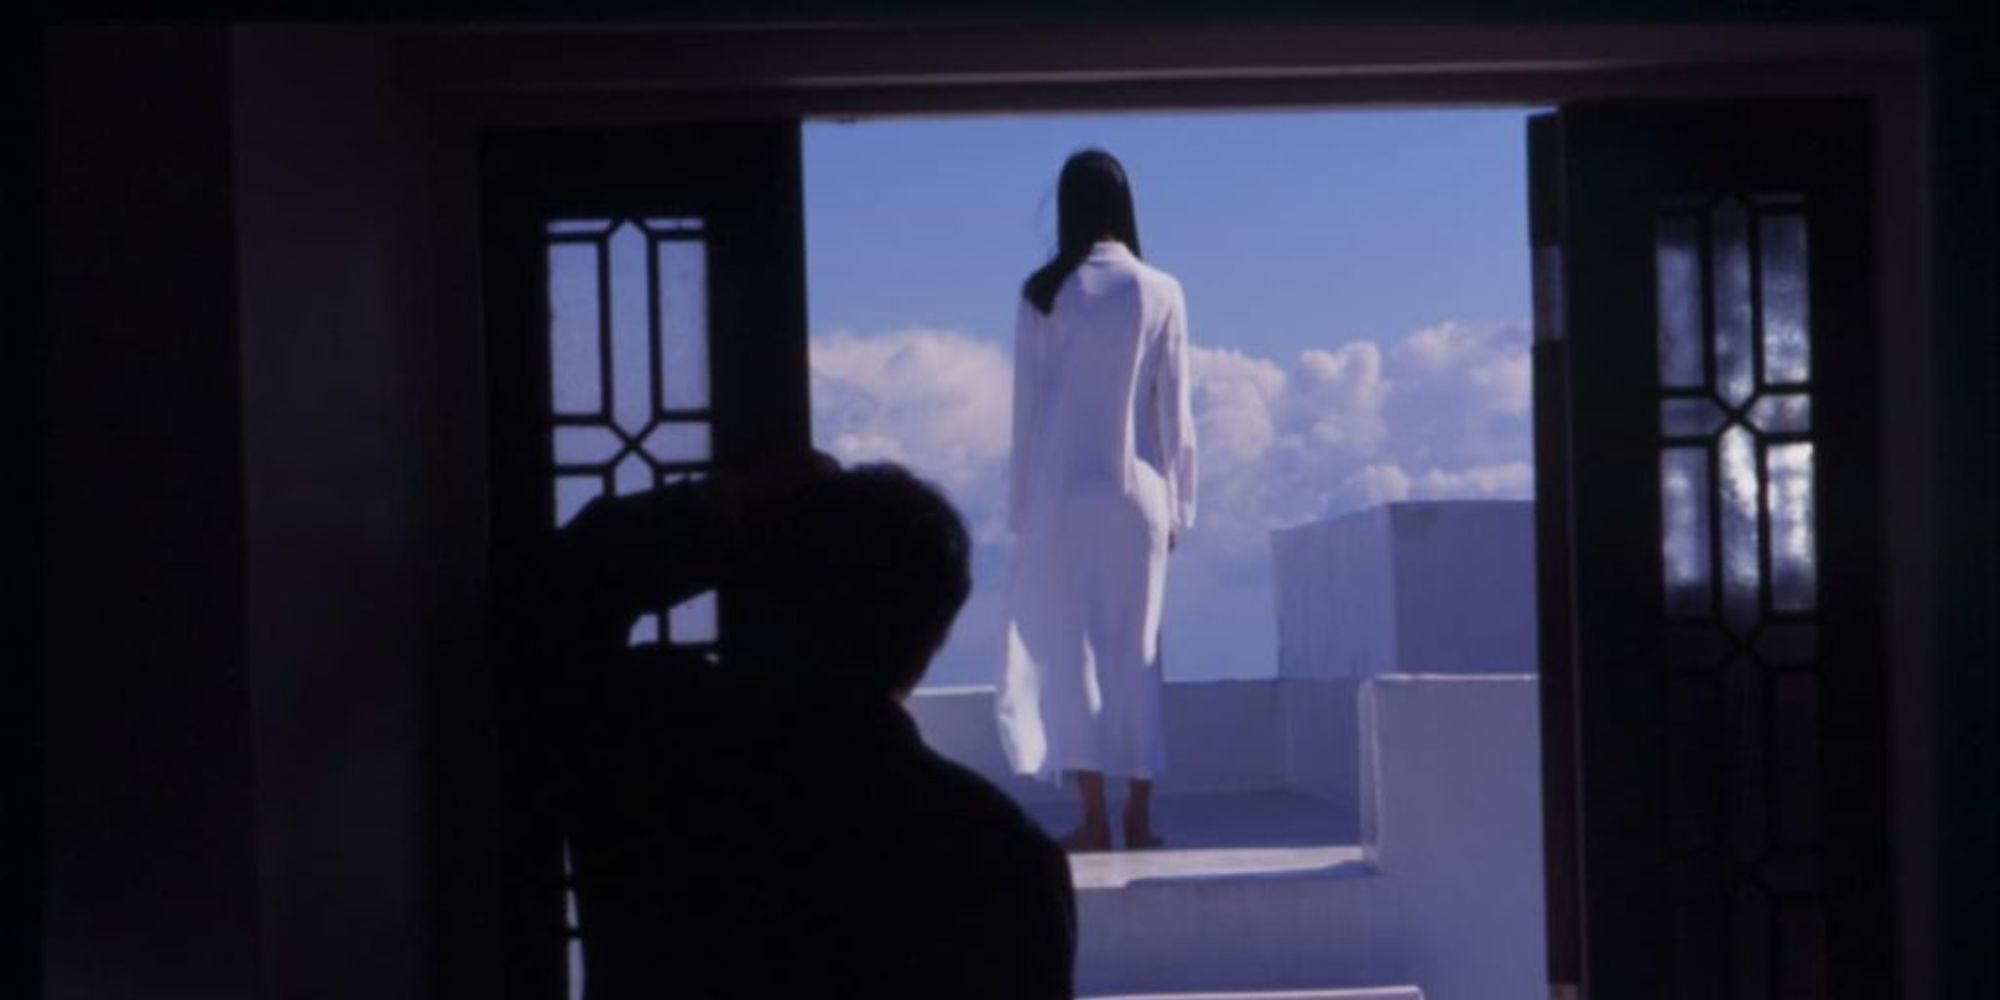 A man staring at a woman dressed in a white dress against a blue sky background in Audition (1999)